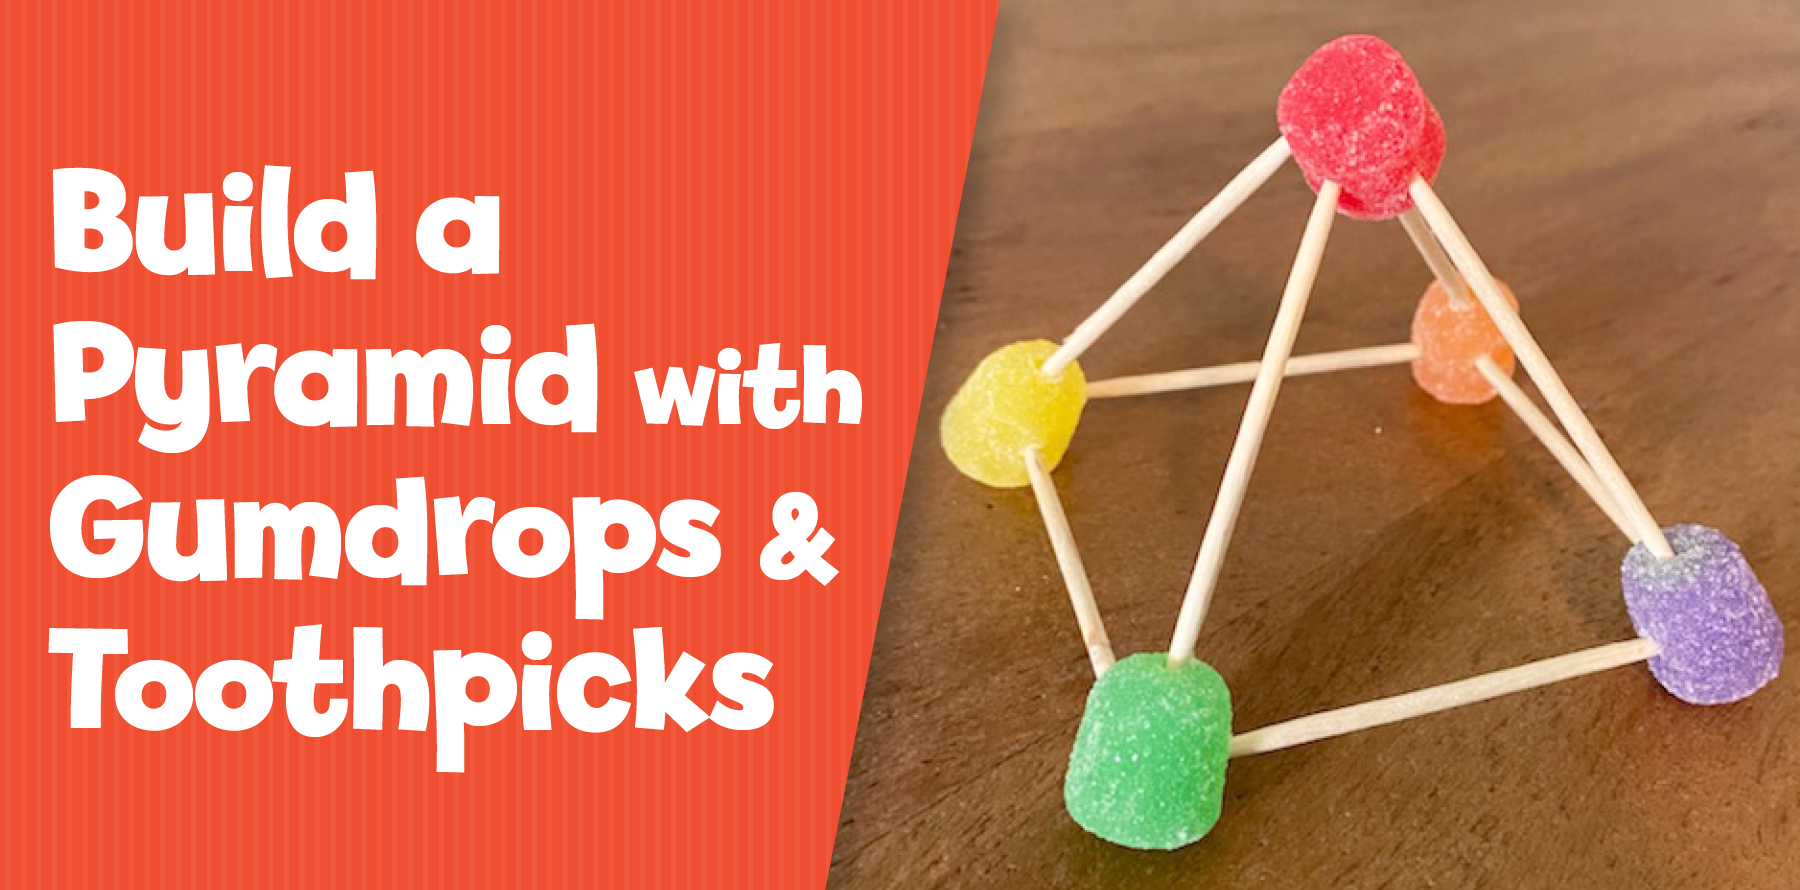 Build a Pyramid with Gumdrops and Toothpicks